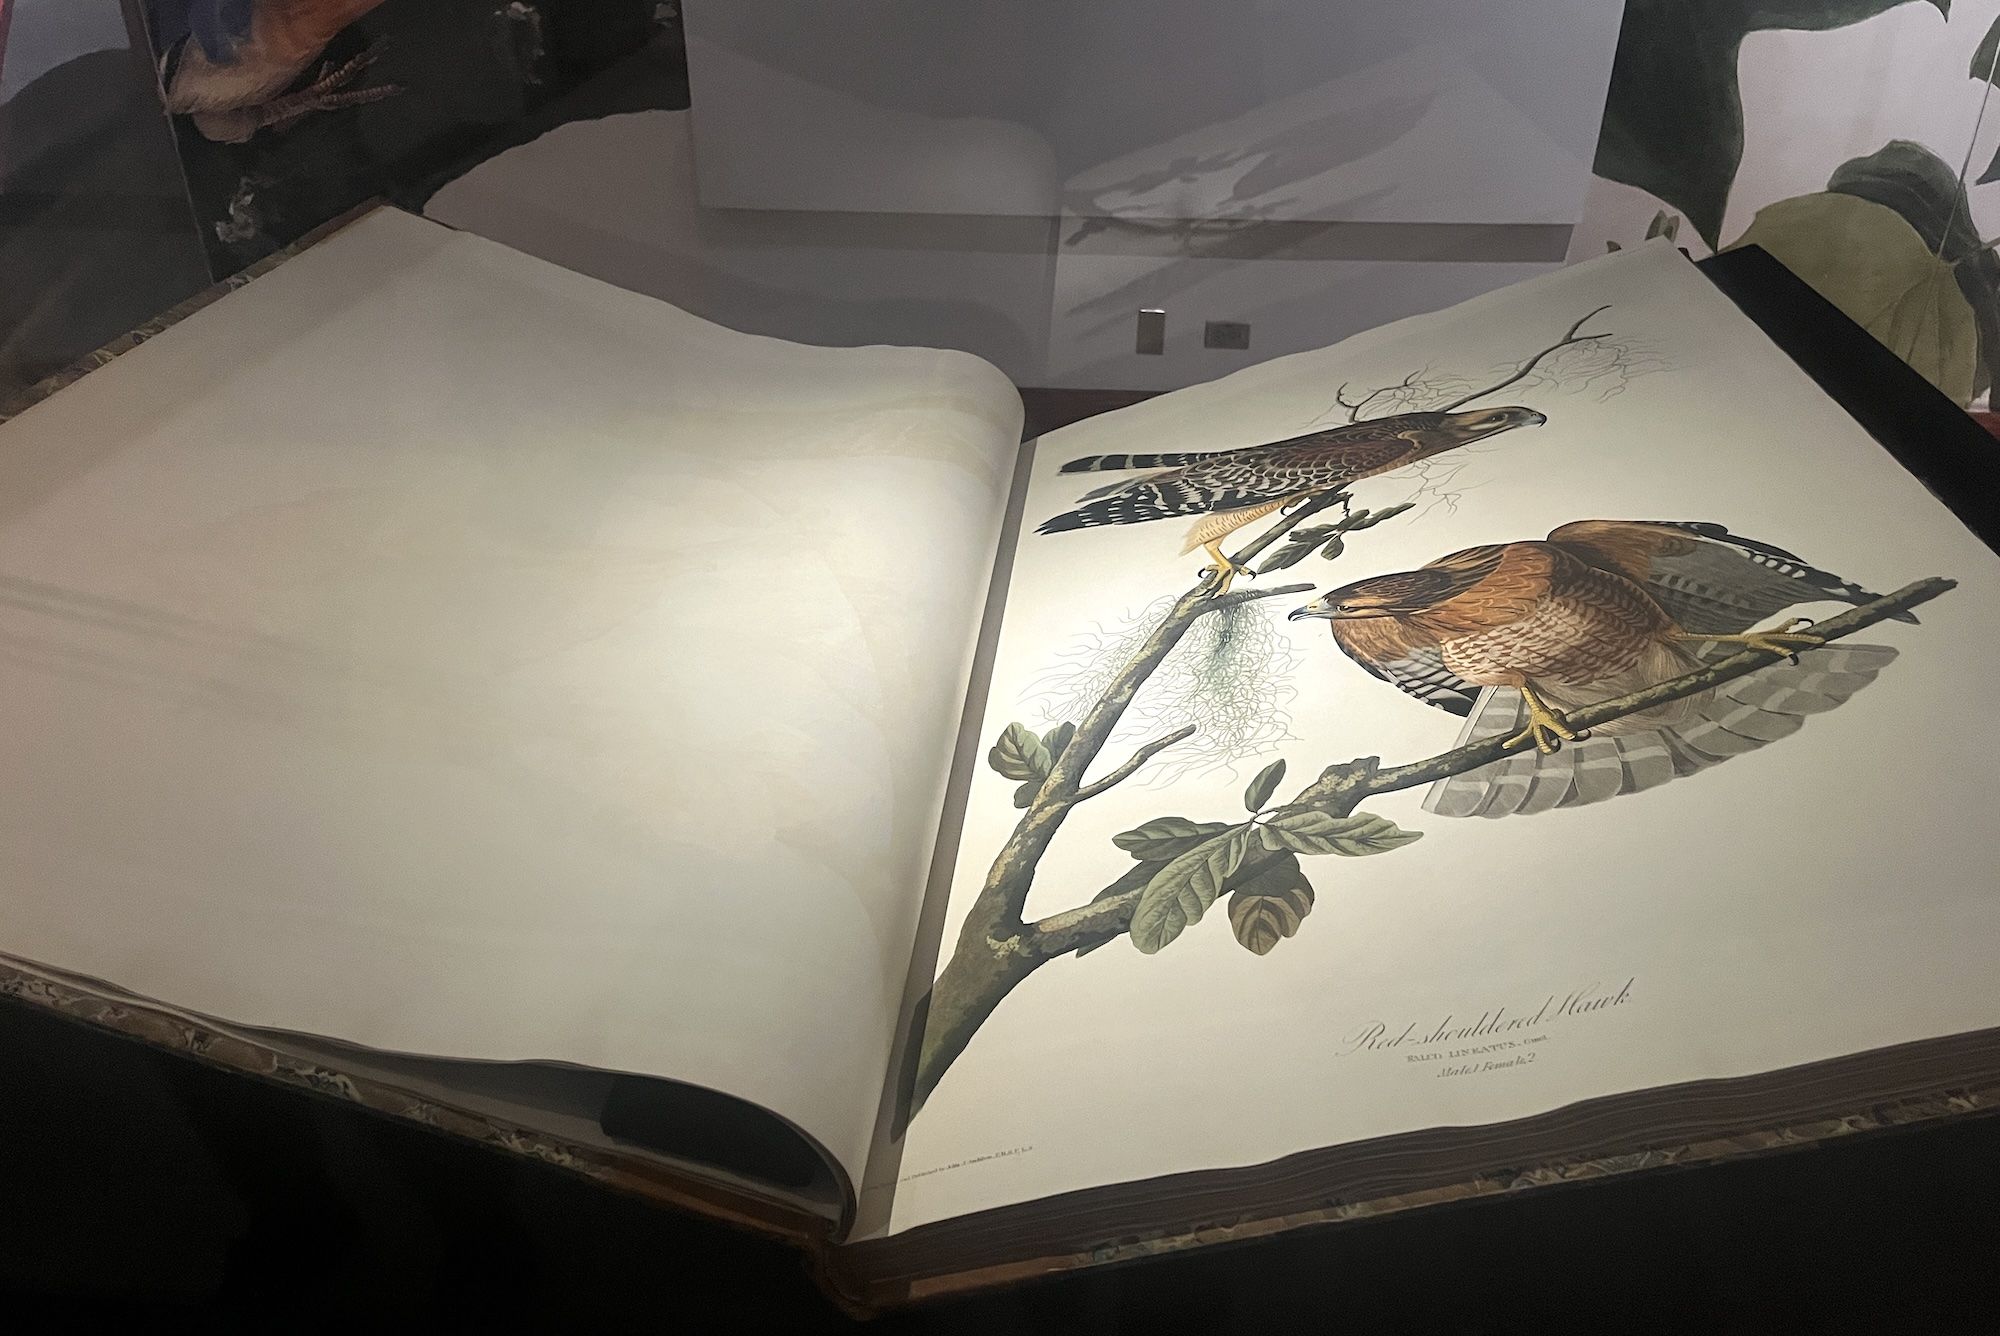 Large book opened to a page with detailed drawings of birds on tree branches.